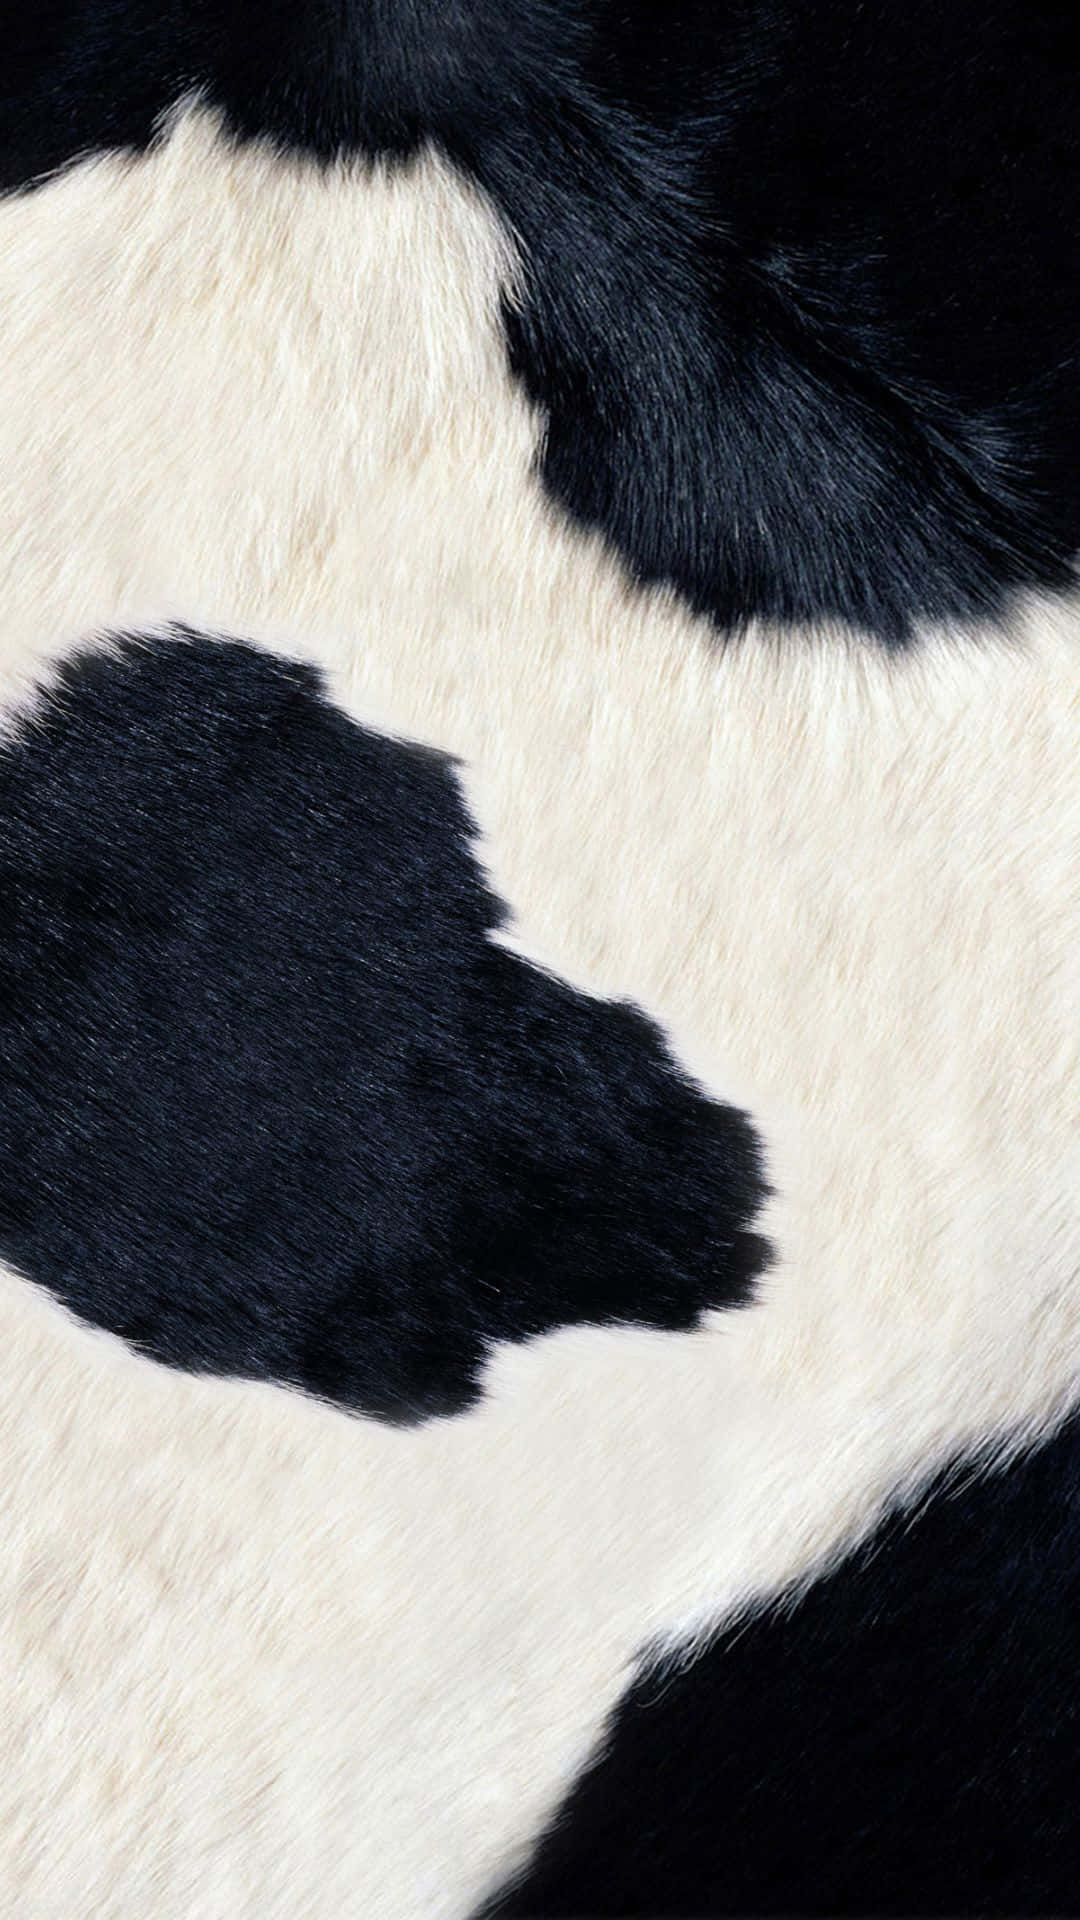 A Black And White Cow With A White Spot On Its Face Background